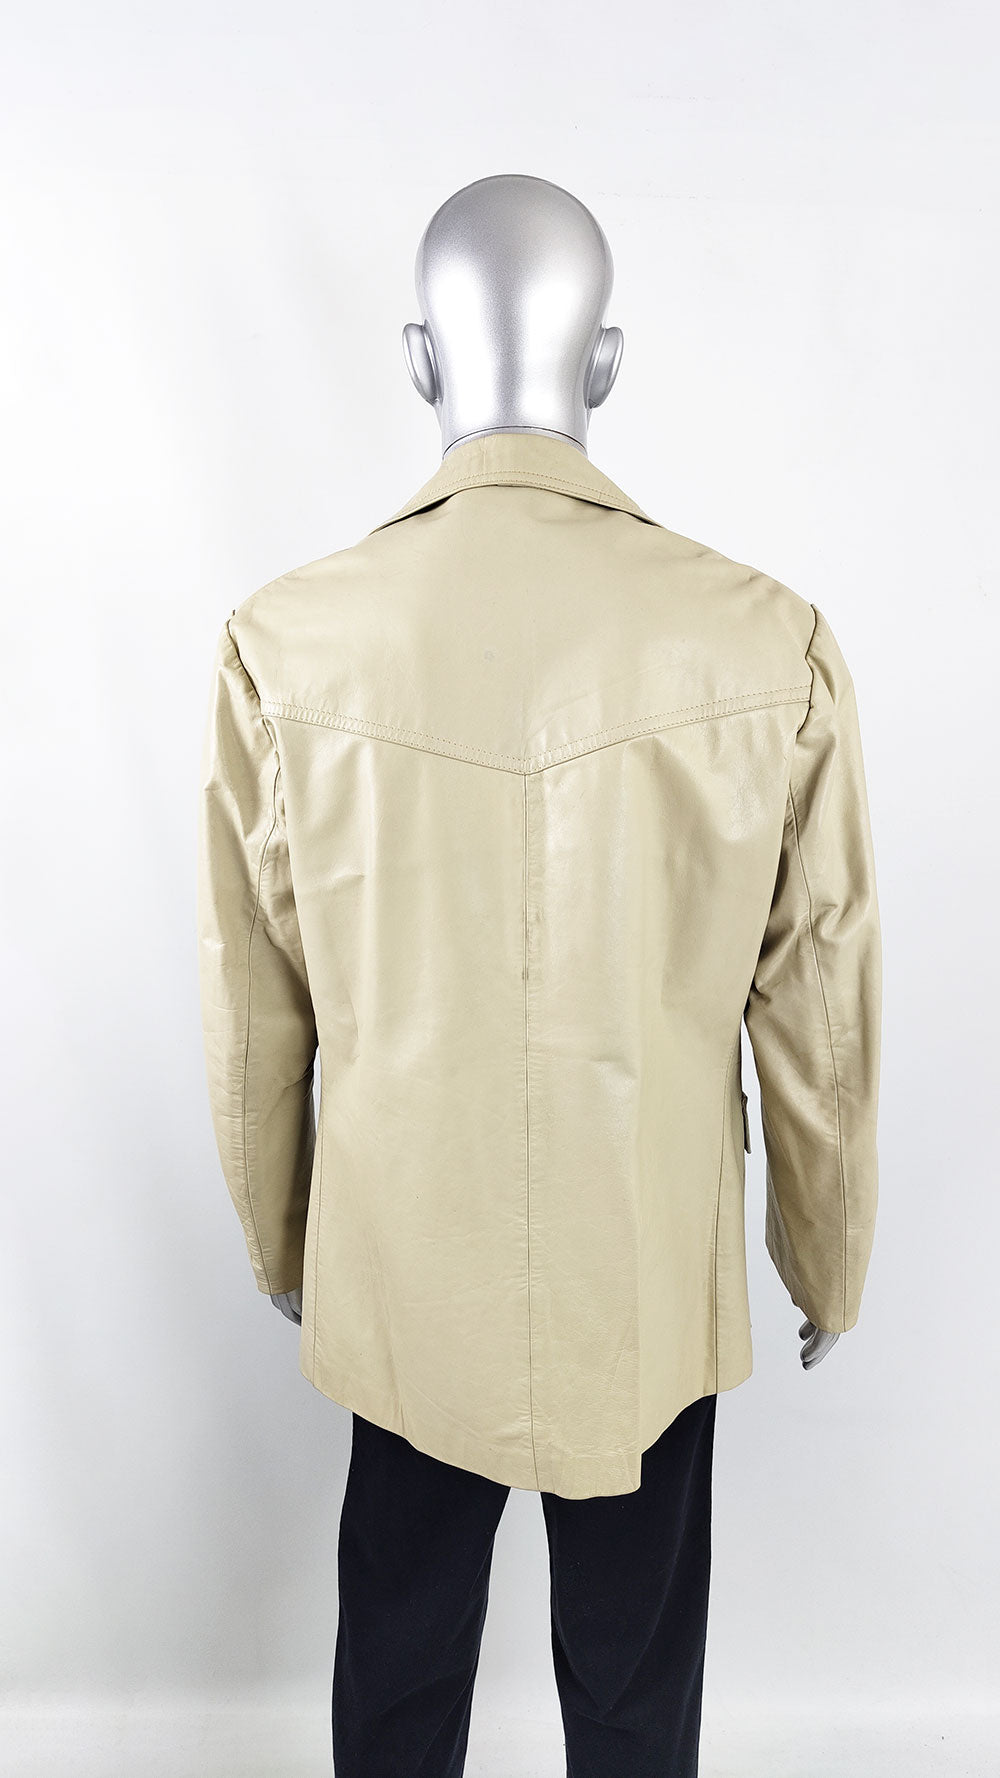 Vintage 60s 70s Mens Cream Real Leather Jacket